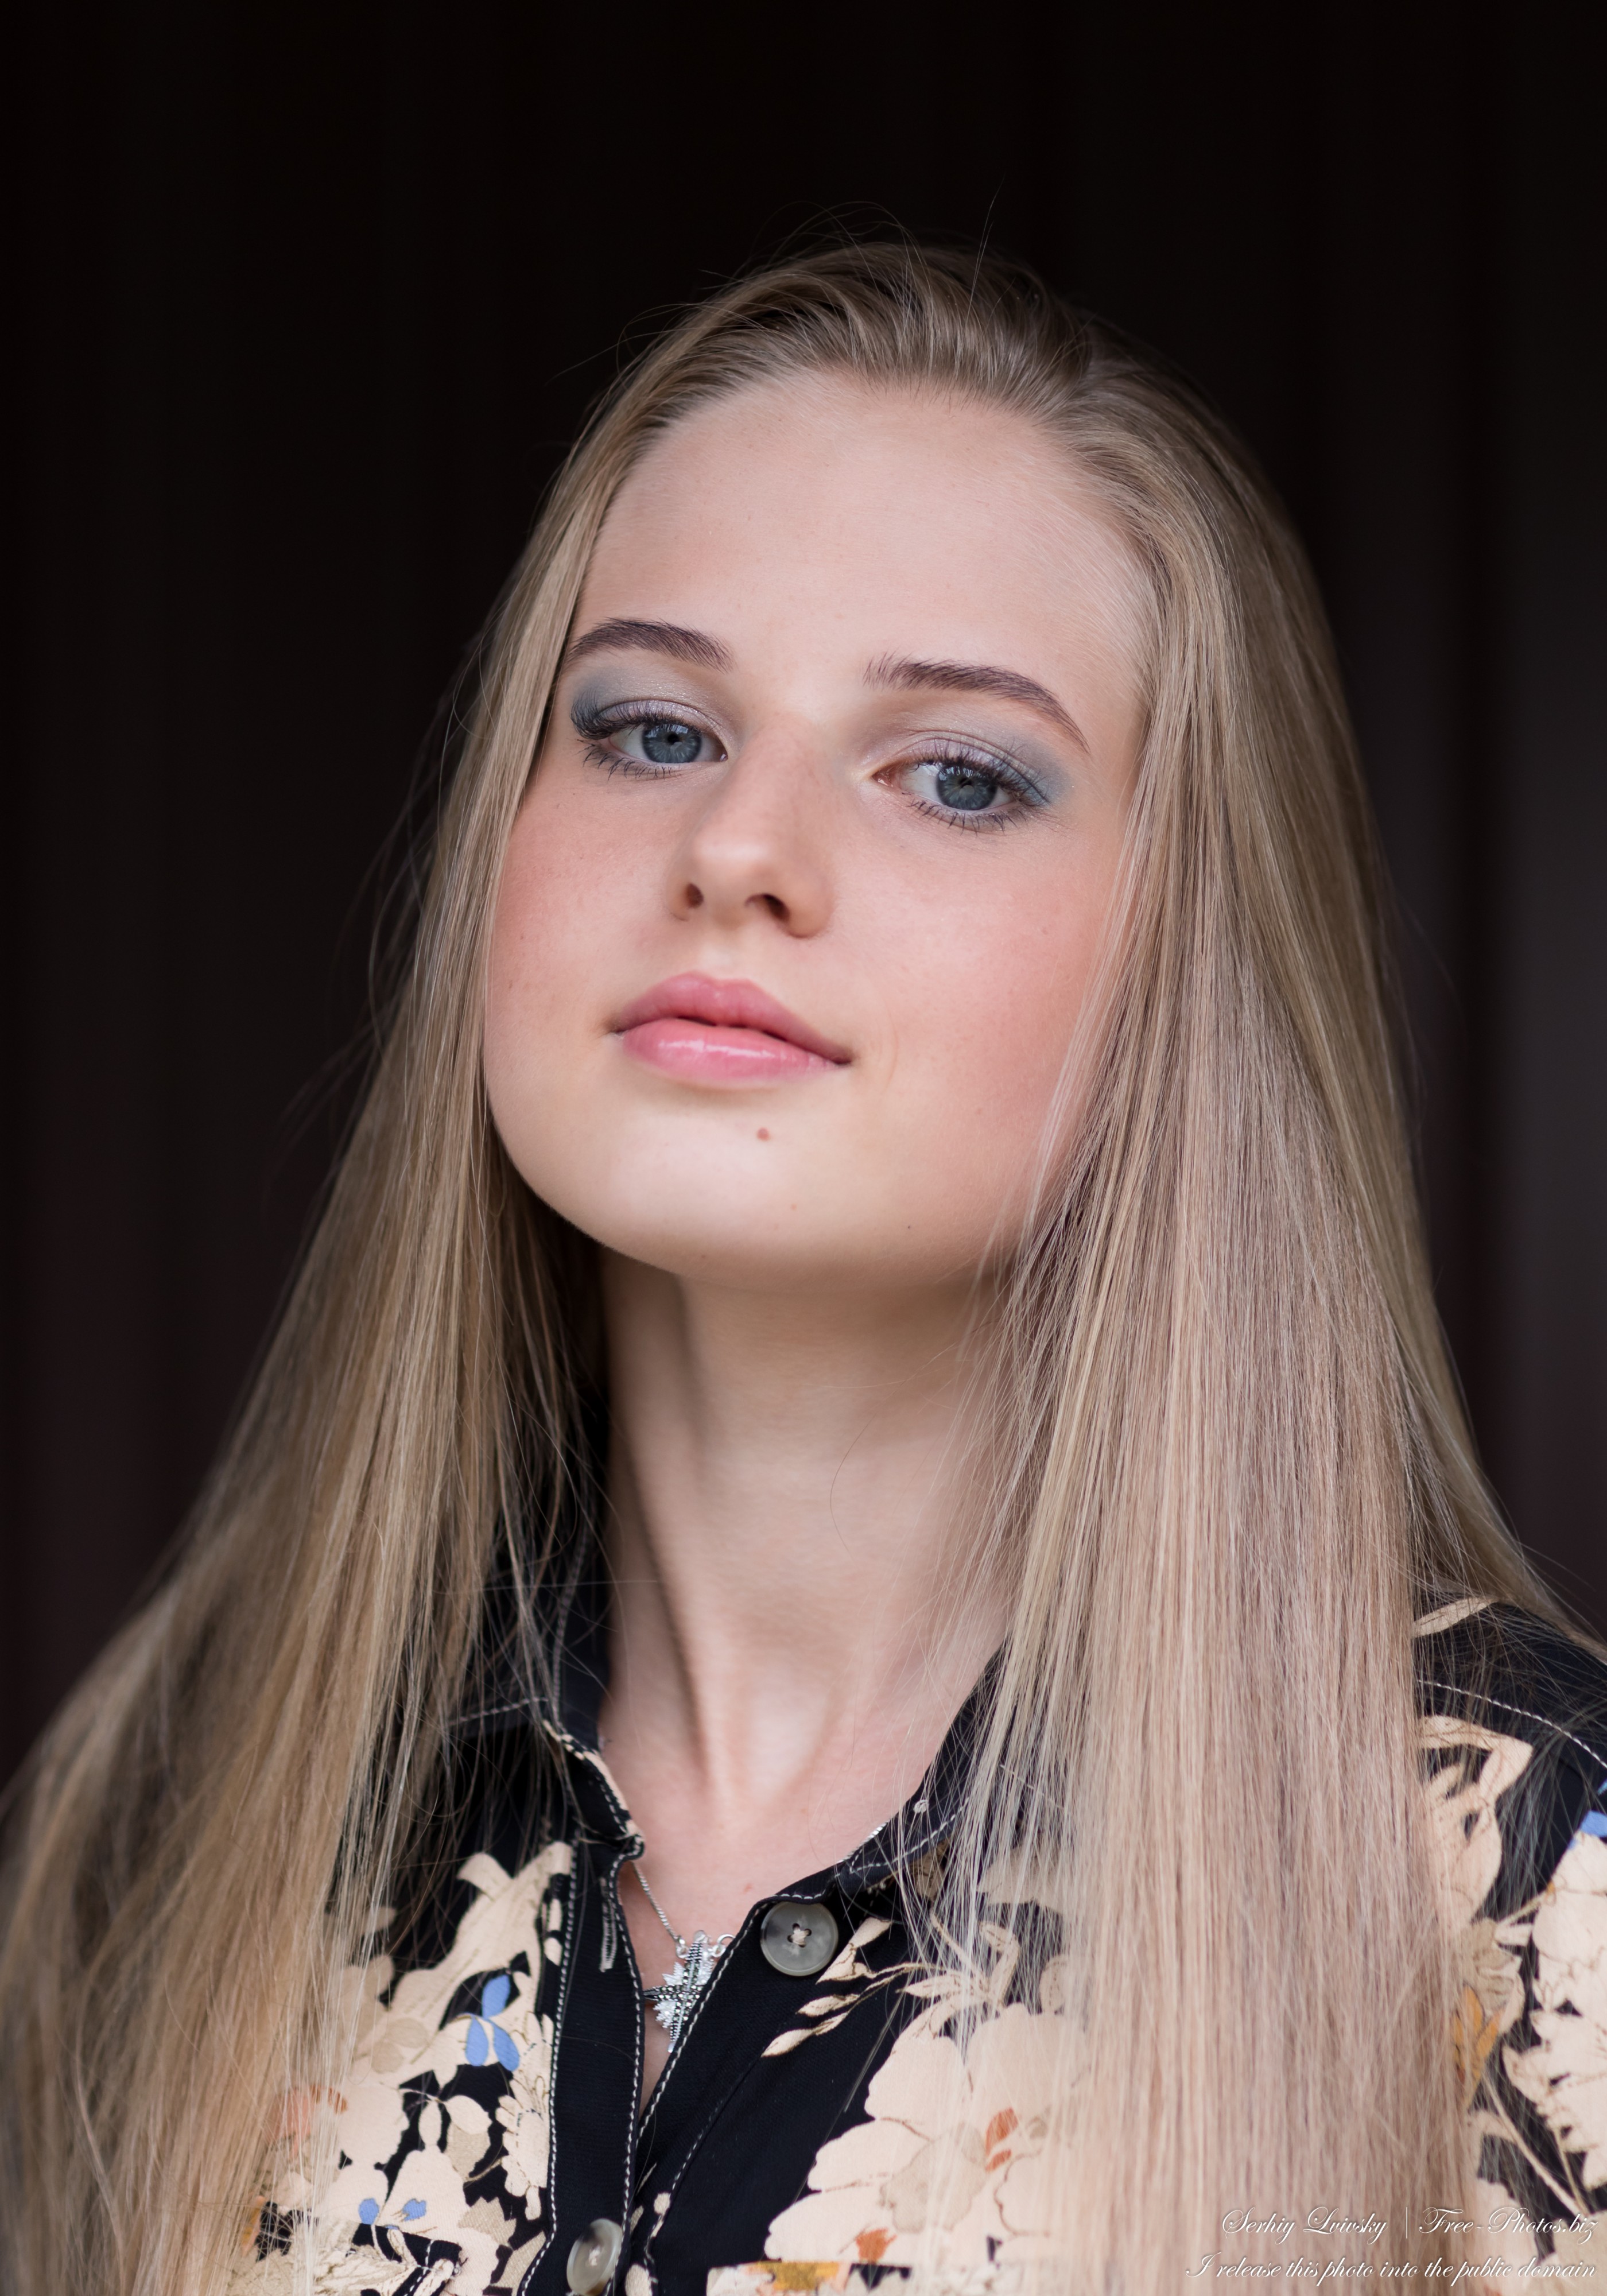 Diana - an 18-year-old natural blonde girl photographed in August 2020 by Serhiy Lvivsky, picture 45